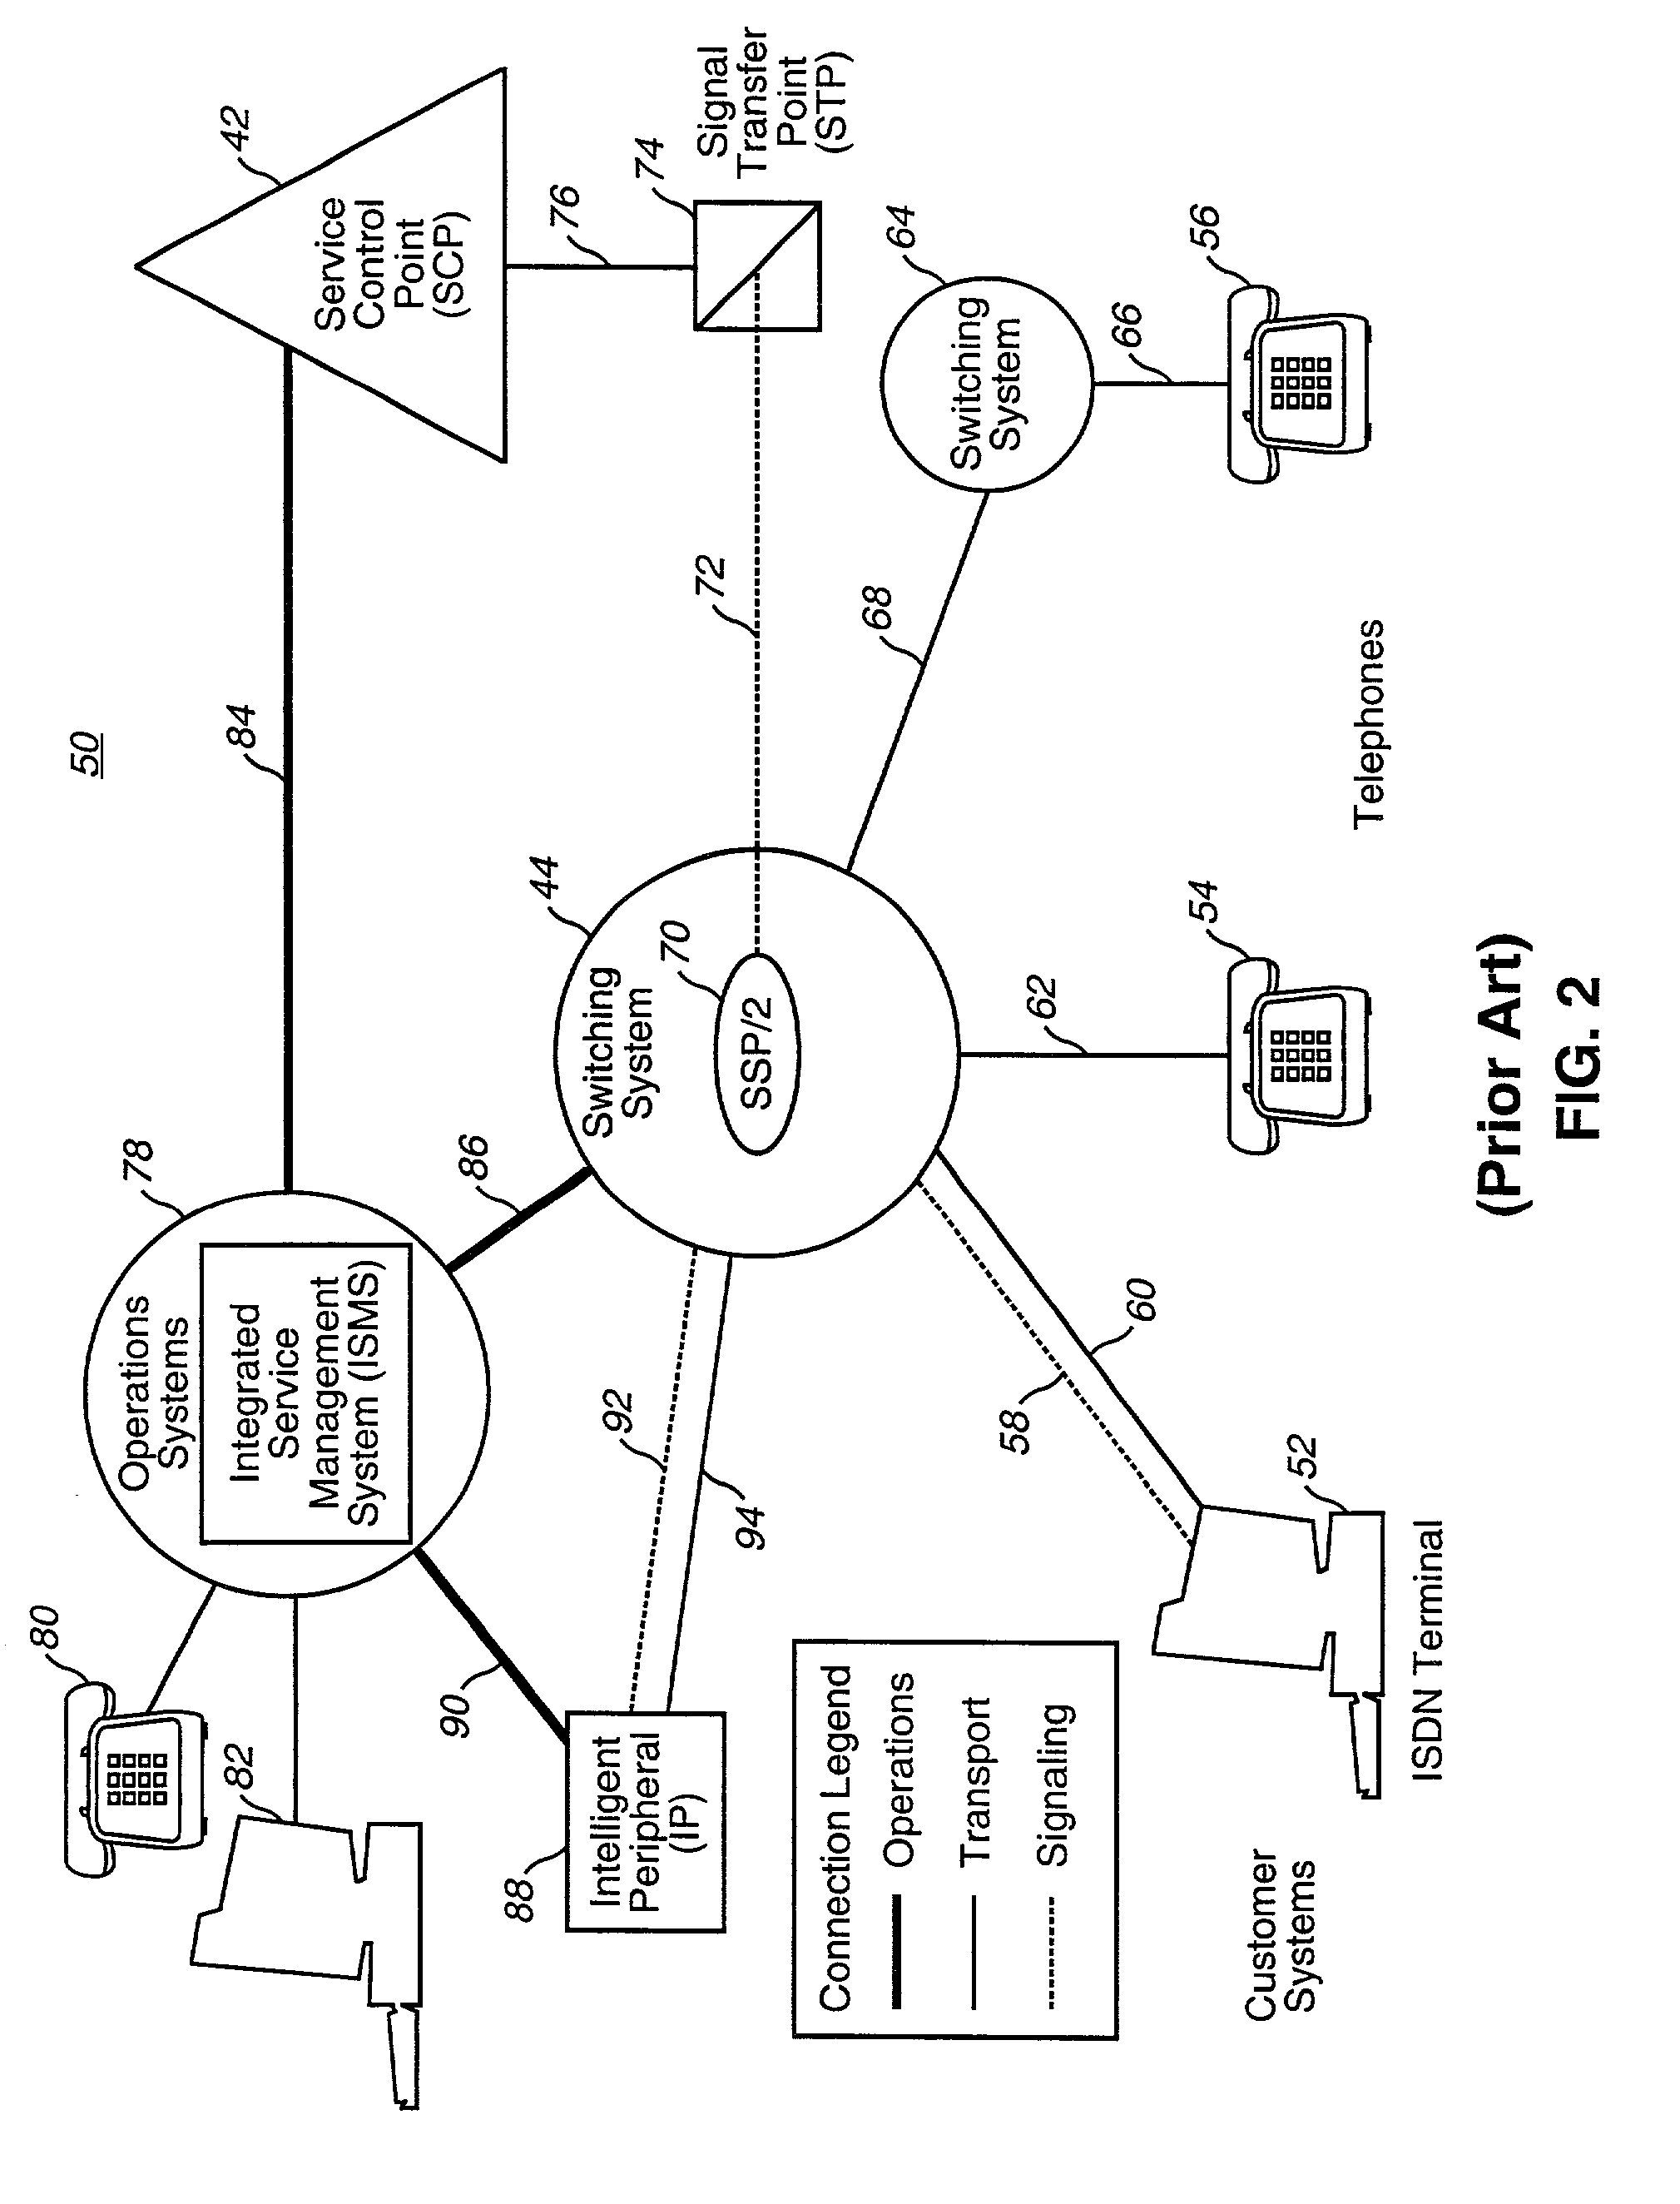 Method and apparatus for managing local resources at service nodes in an intelligent network